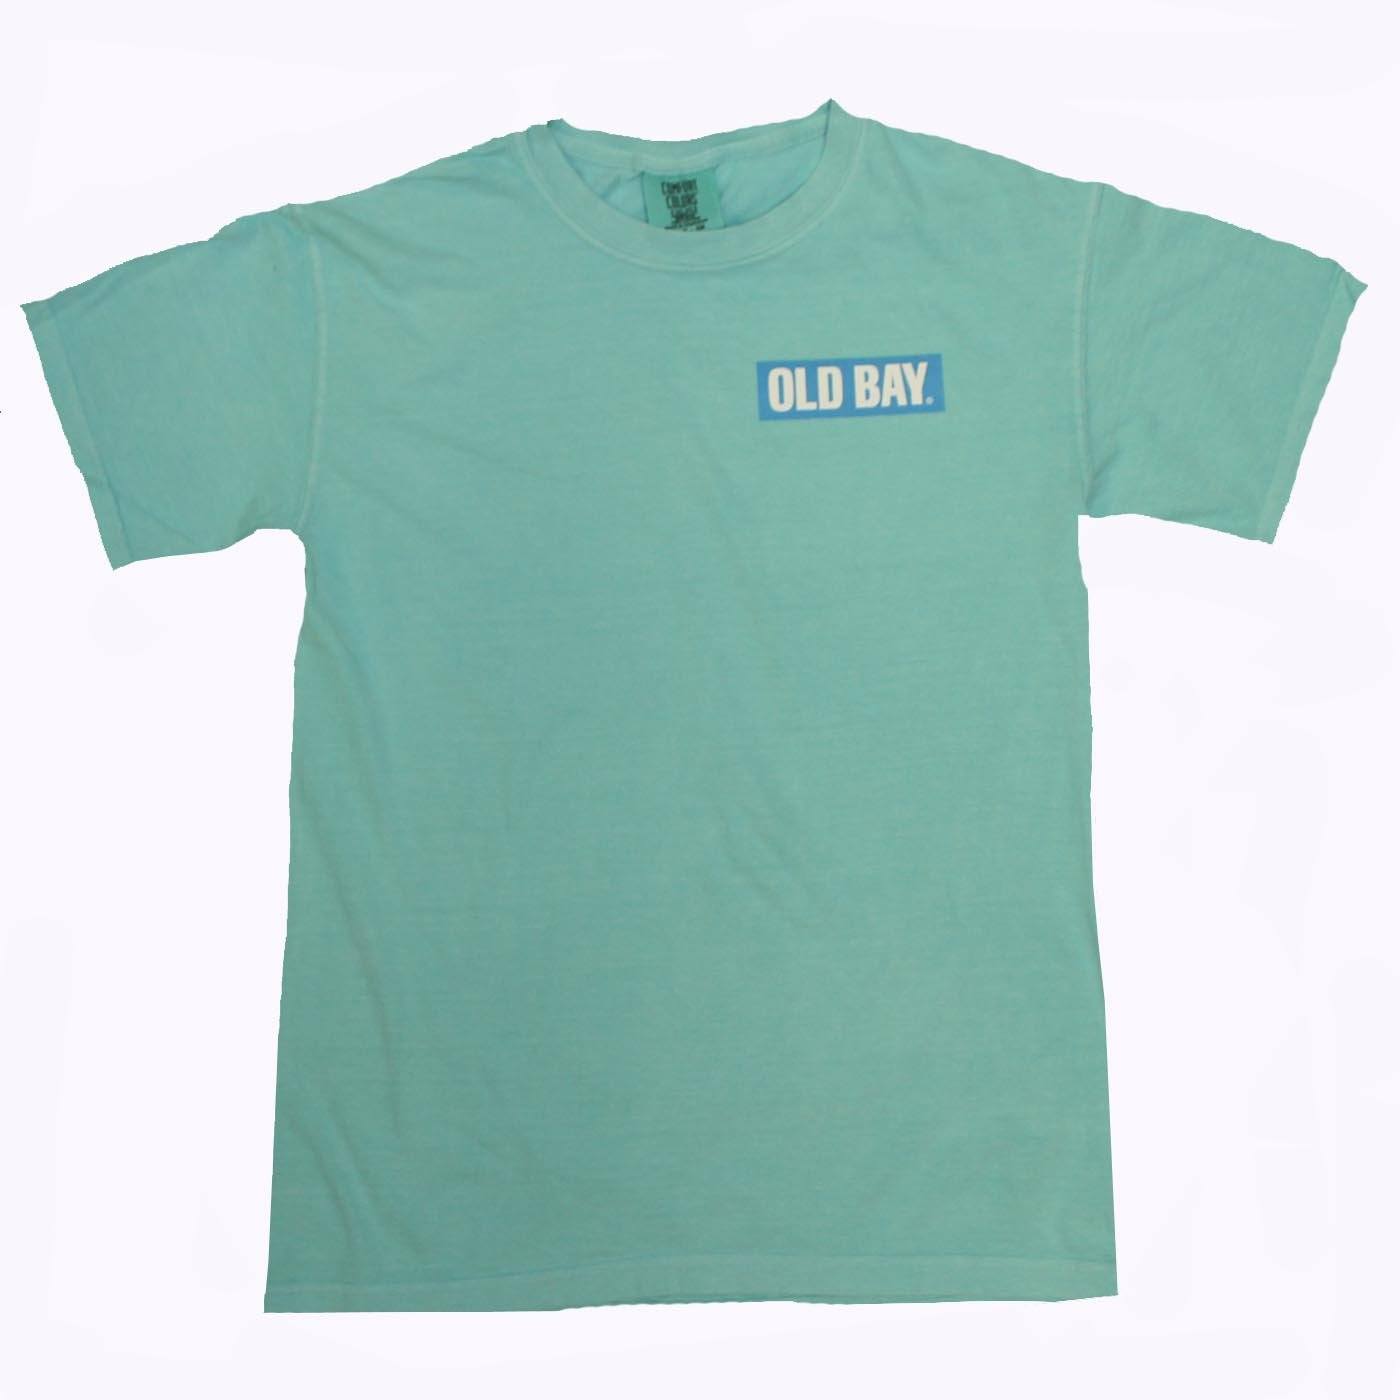 Crabaritaville - Old Bay, USA (Chalky Mint) / Shirt - Route One Apparel